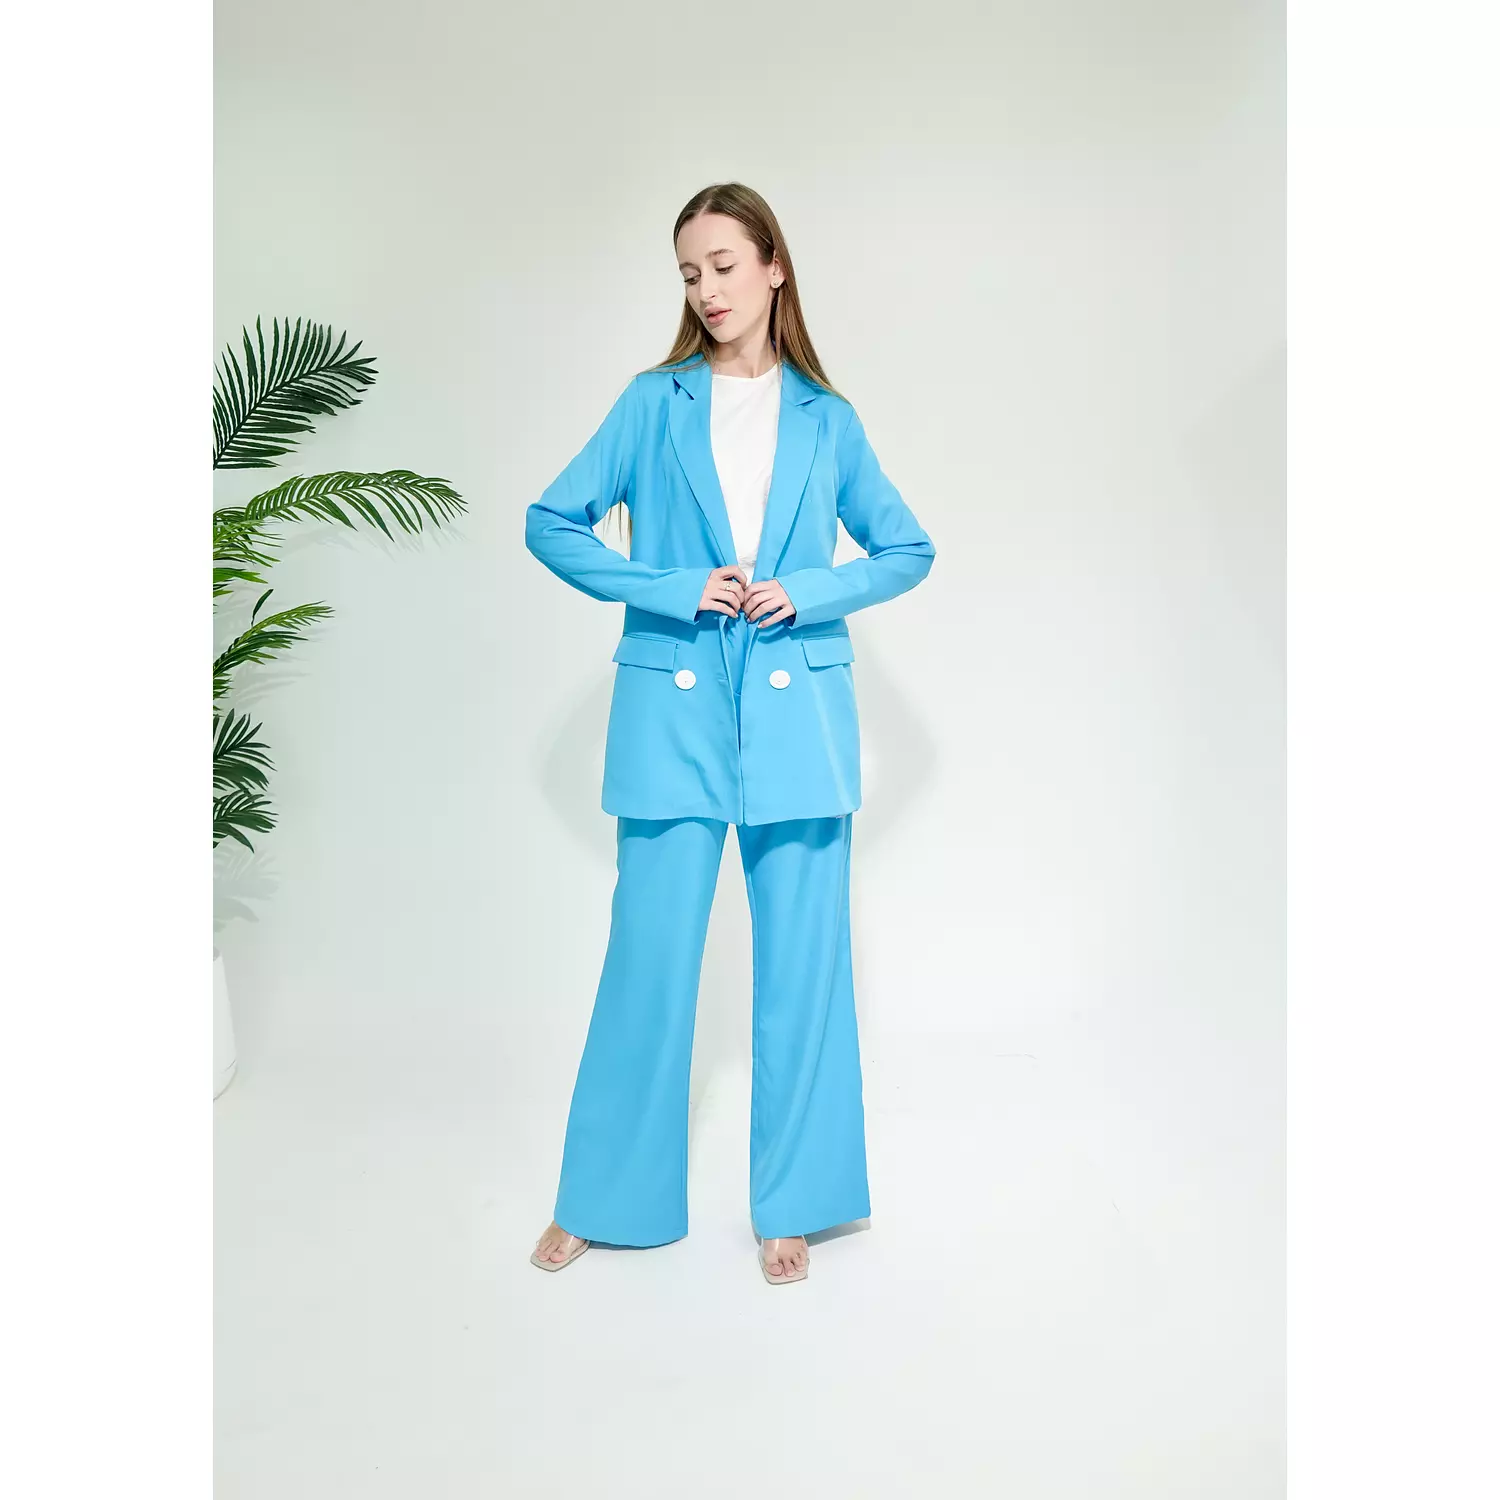 TURQUOISE SUIT 5